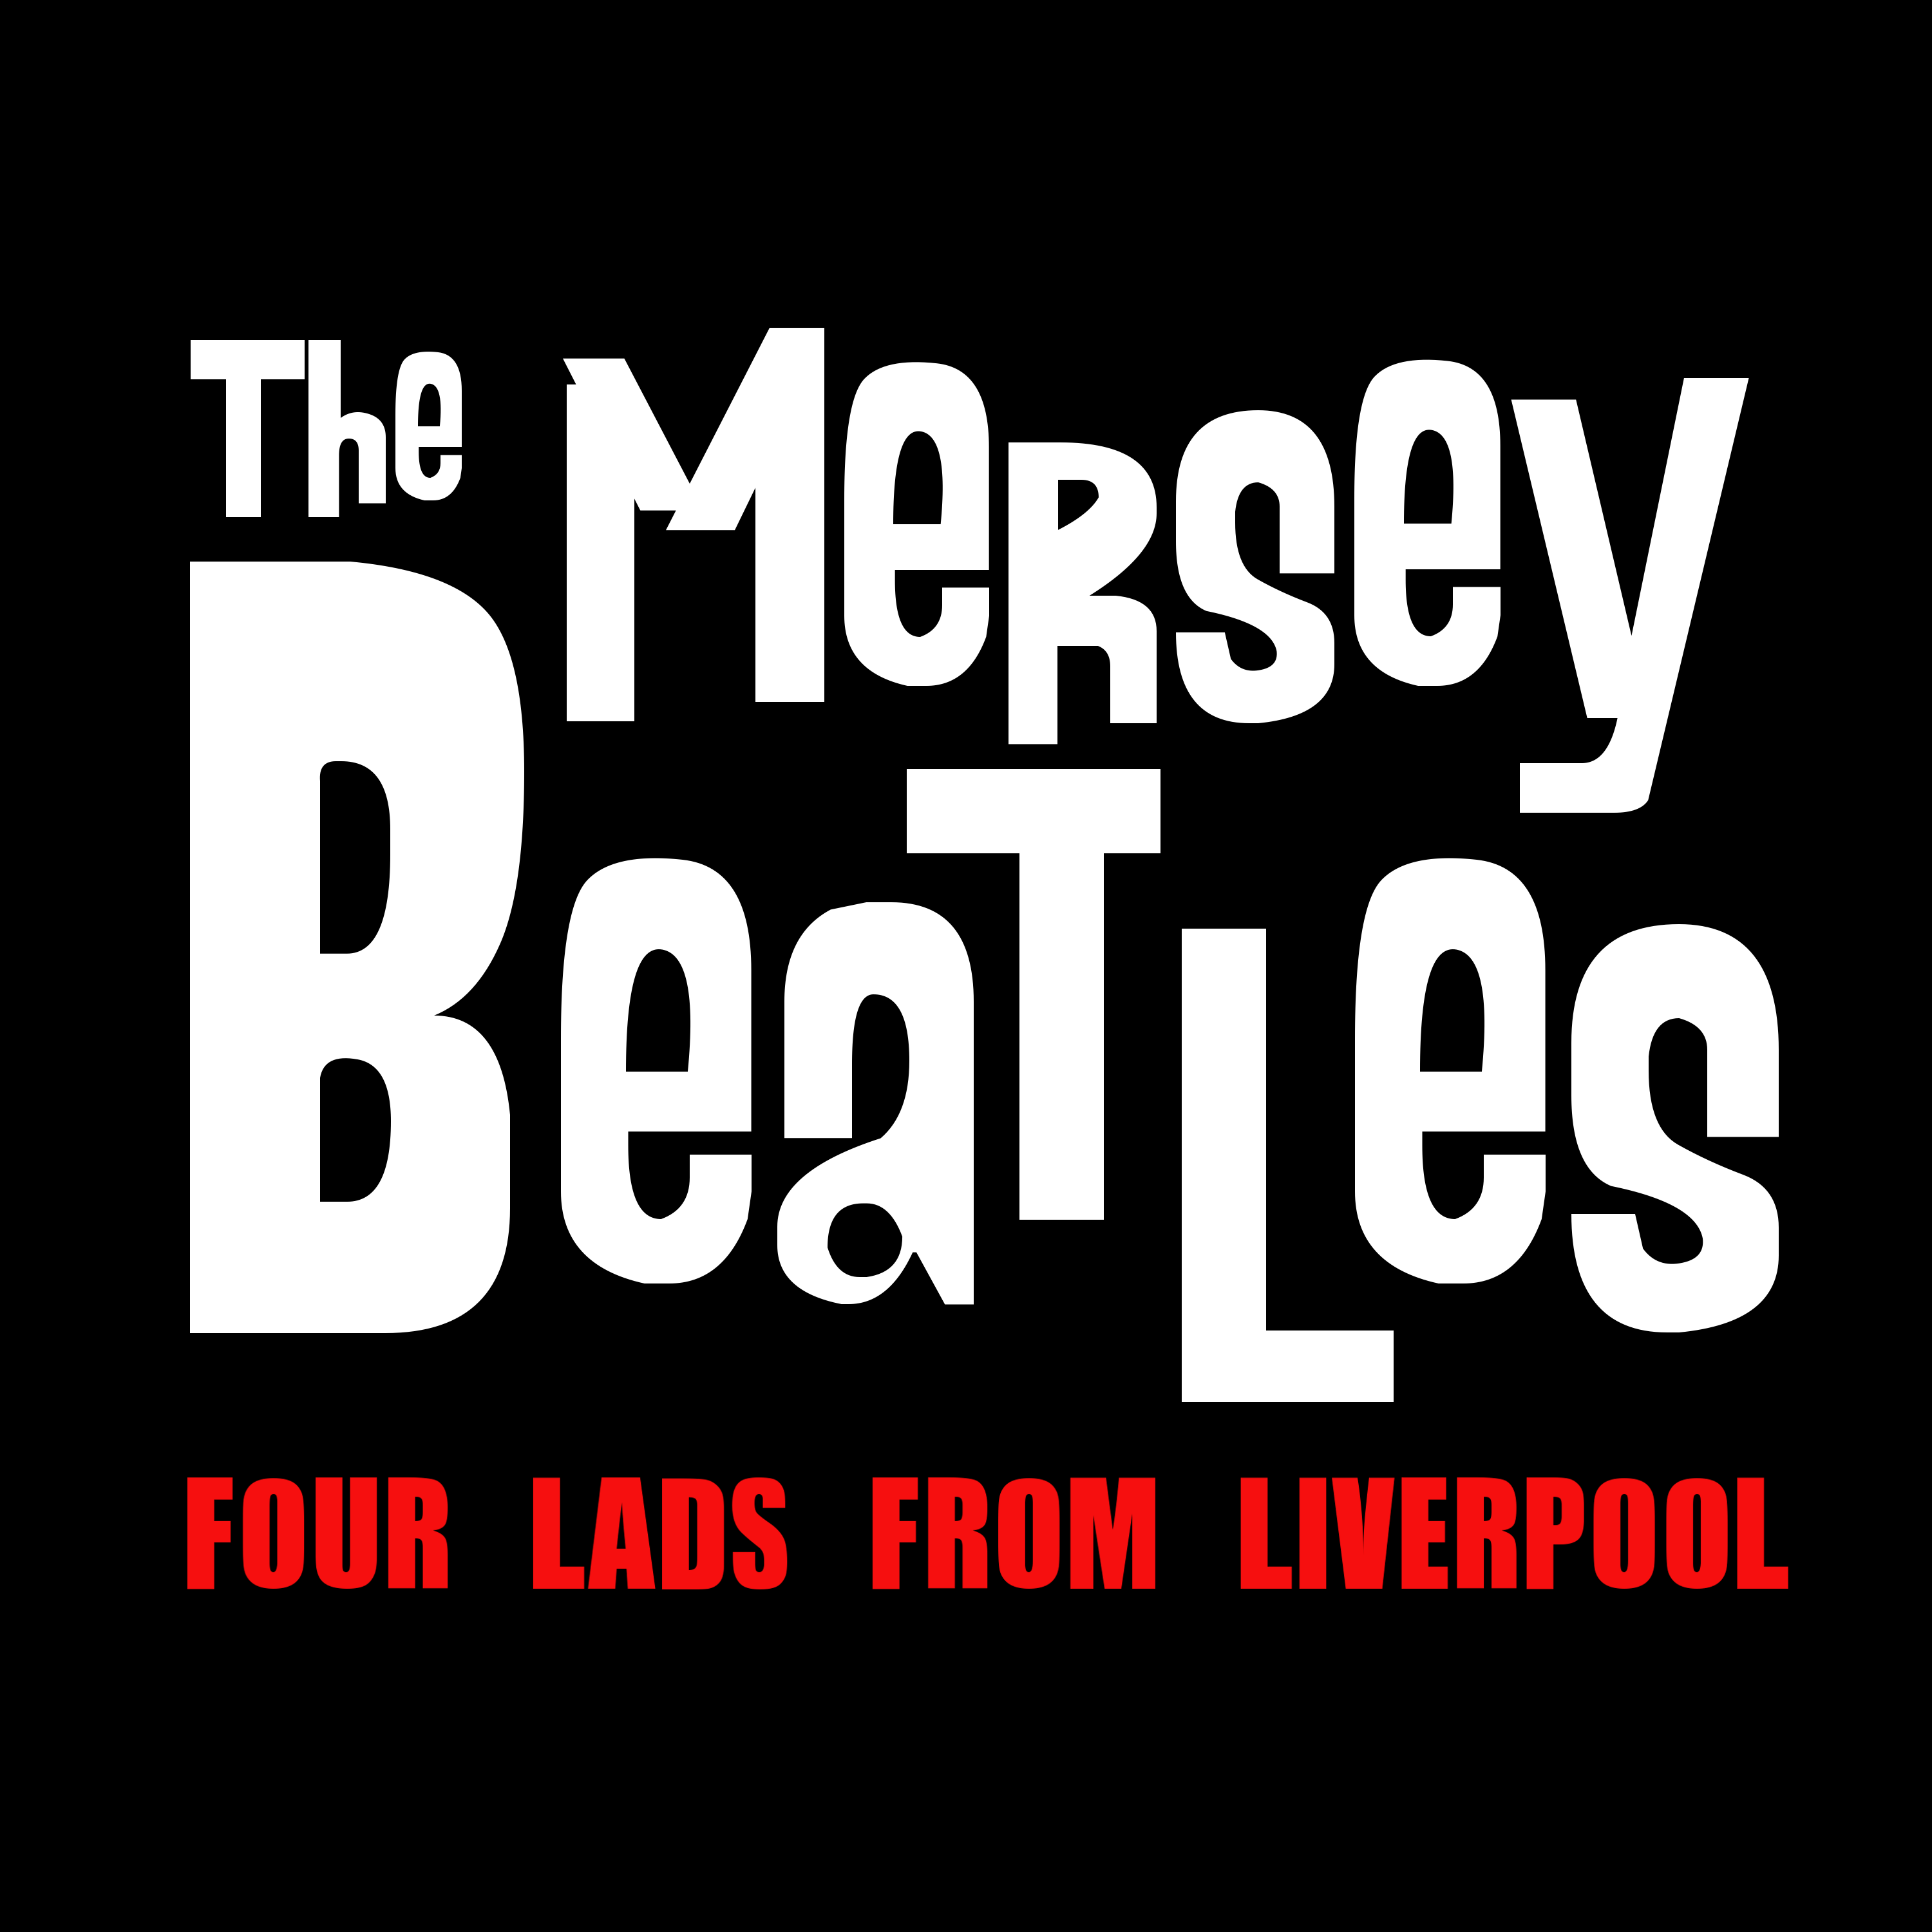 The Mersey Beatles: Four Lads from Liverpool ALL THE HITS!